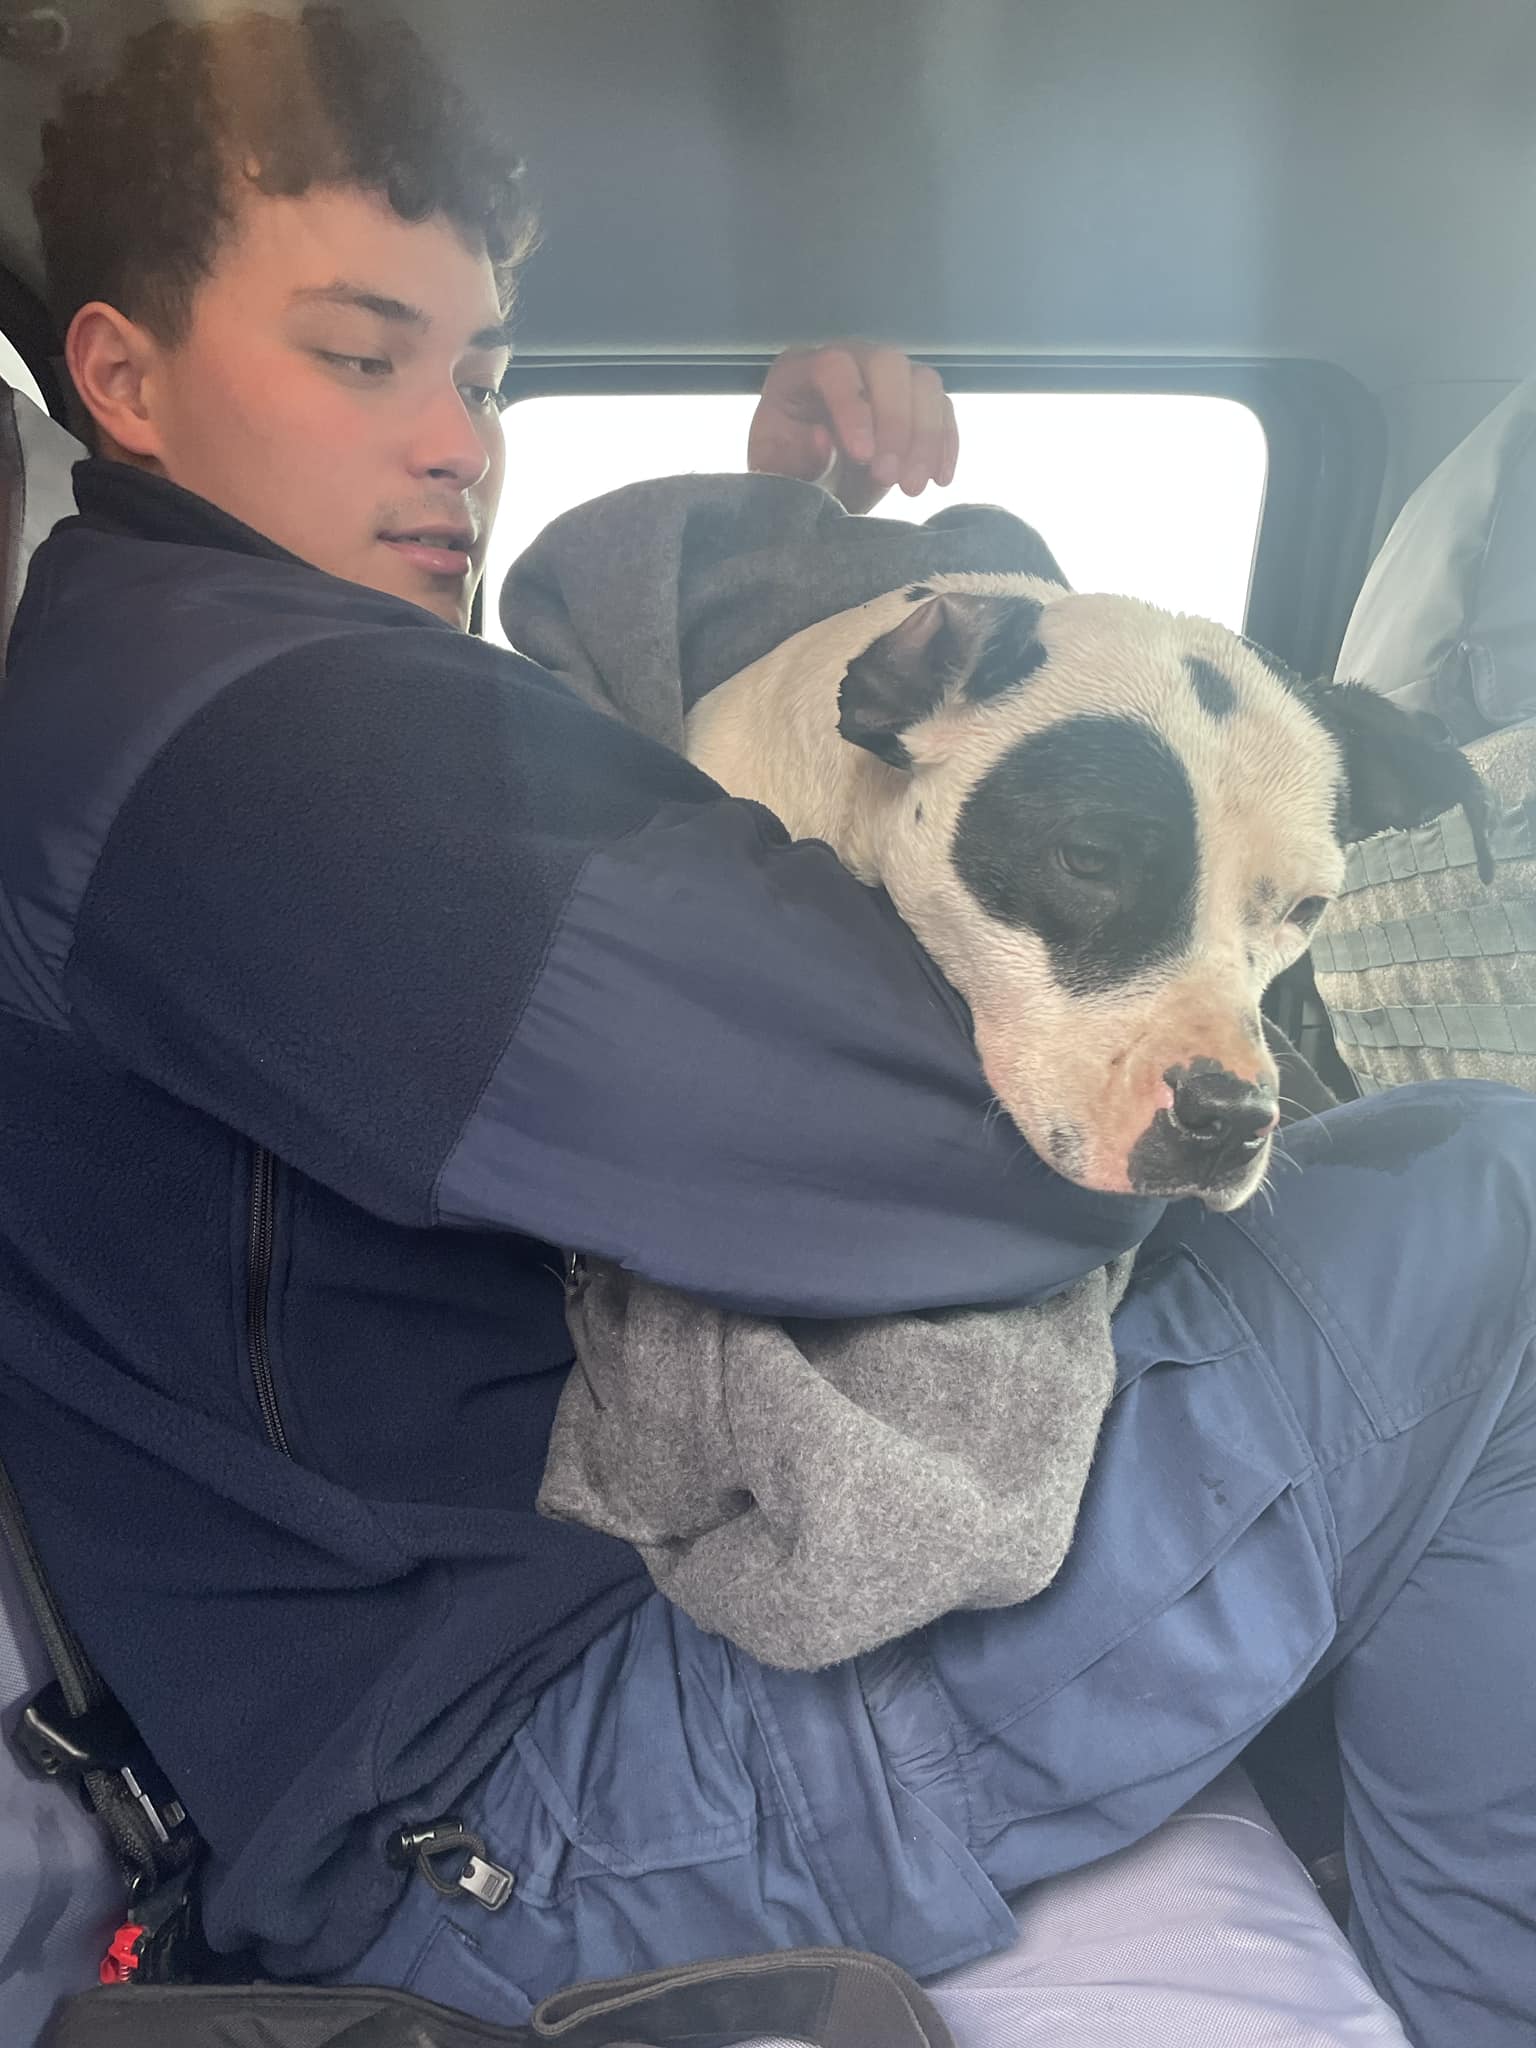 A Coast Guard crew comes to the rescue of a "grateful" dog trapped in icy waters, showcasing the lifesaving efforts and the bond between humans and animals. - Puppies Love